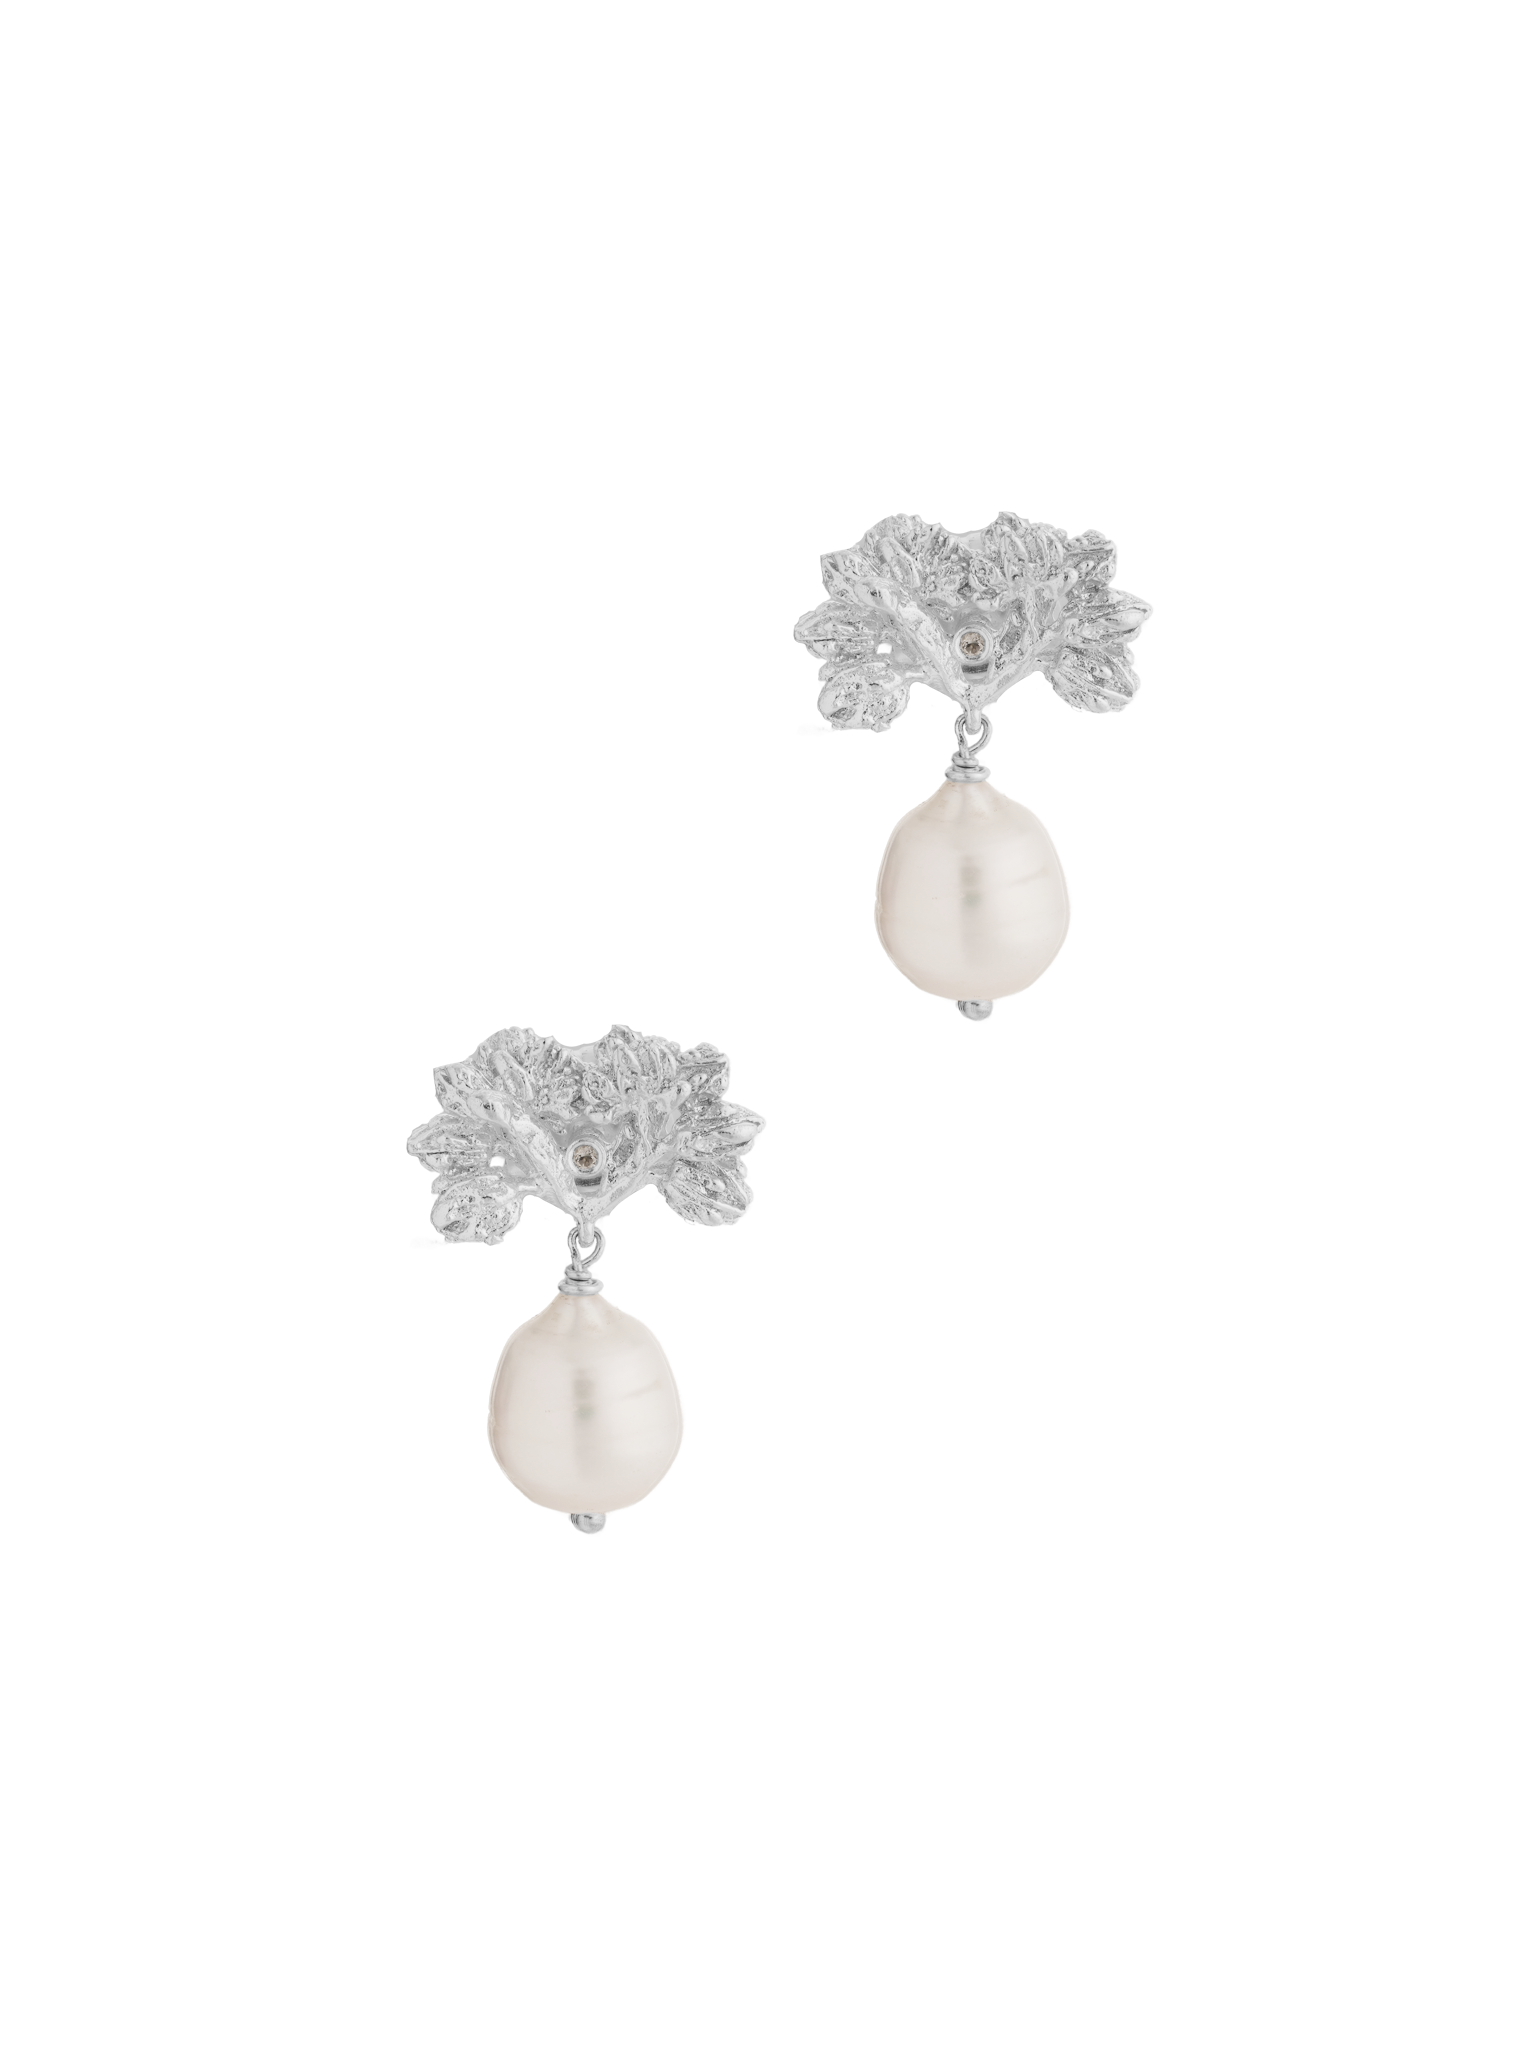 A pair of Cremilde Bispo Jewellery's Pearly Forest Earrings, made of sterling silver and featuring pearls, on a white background.